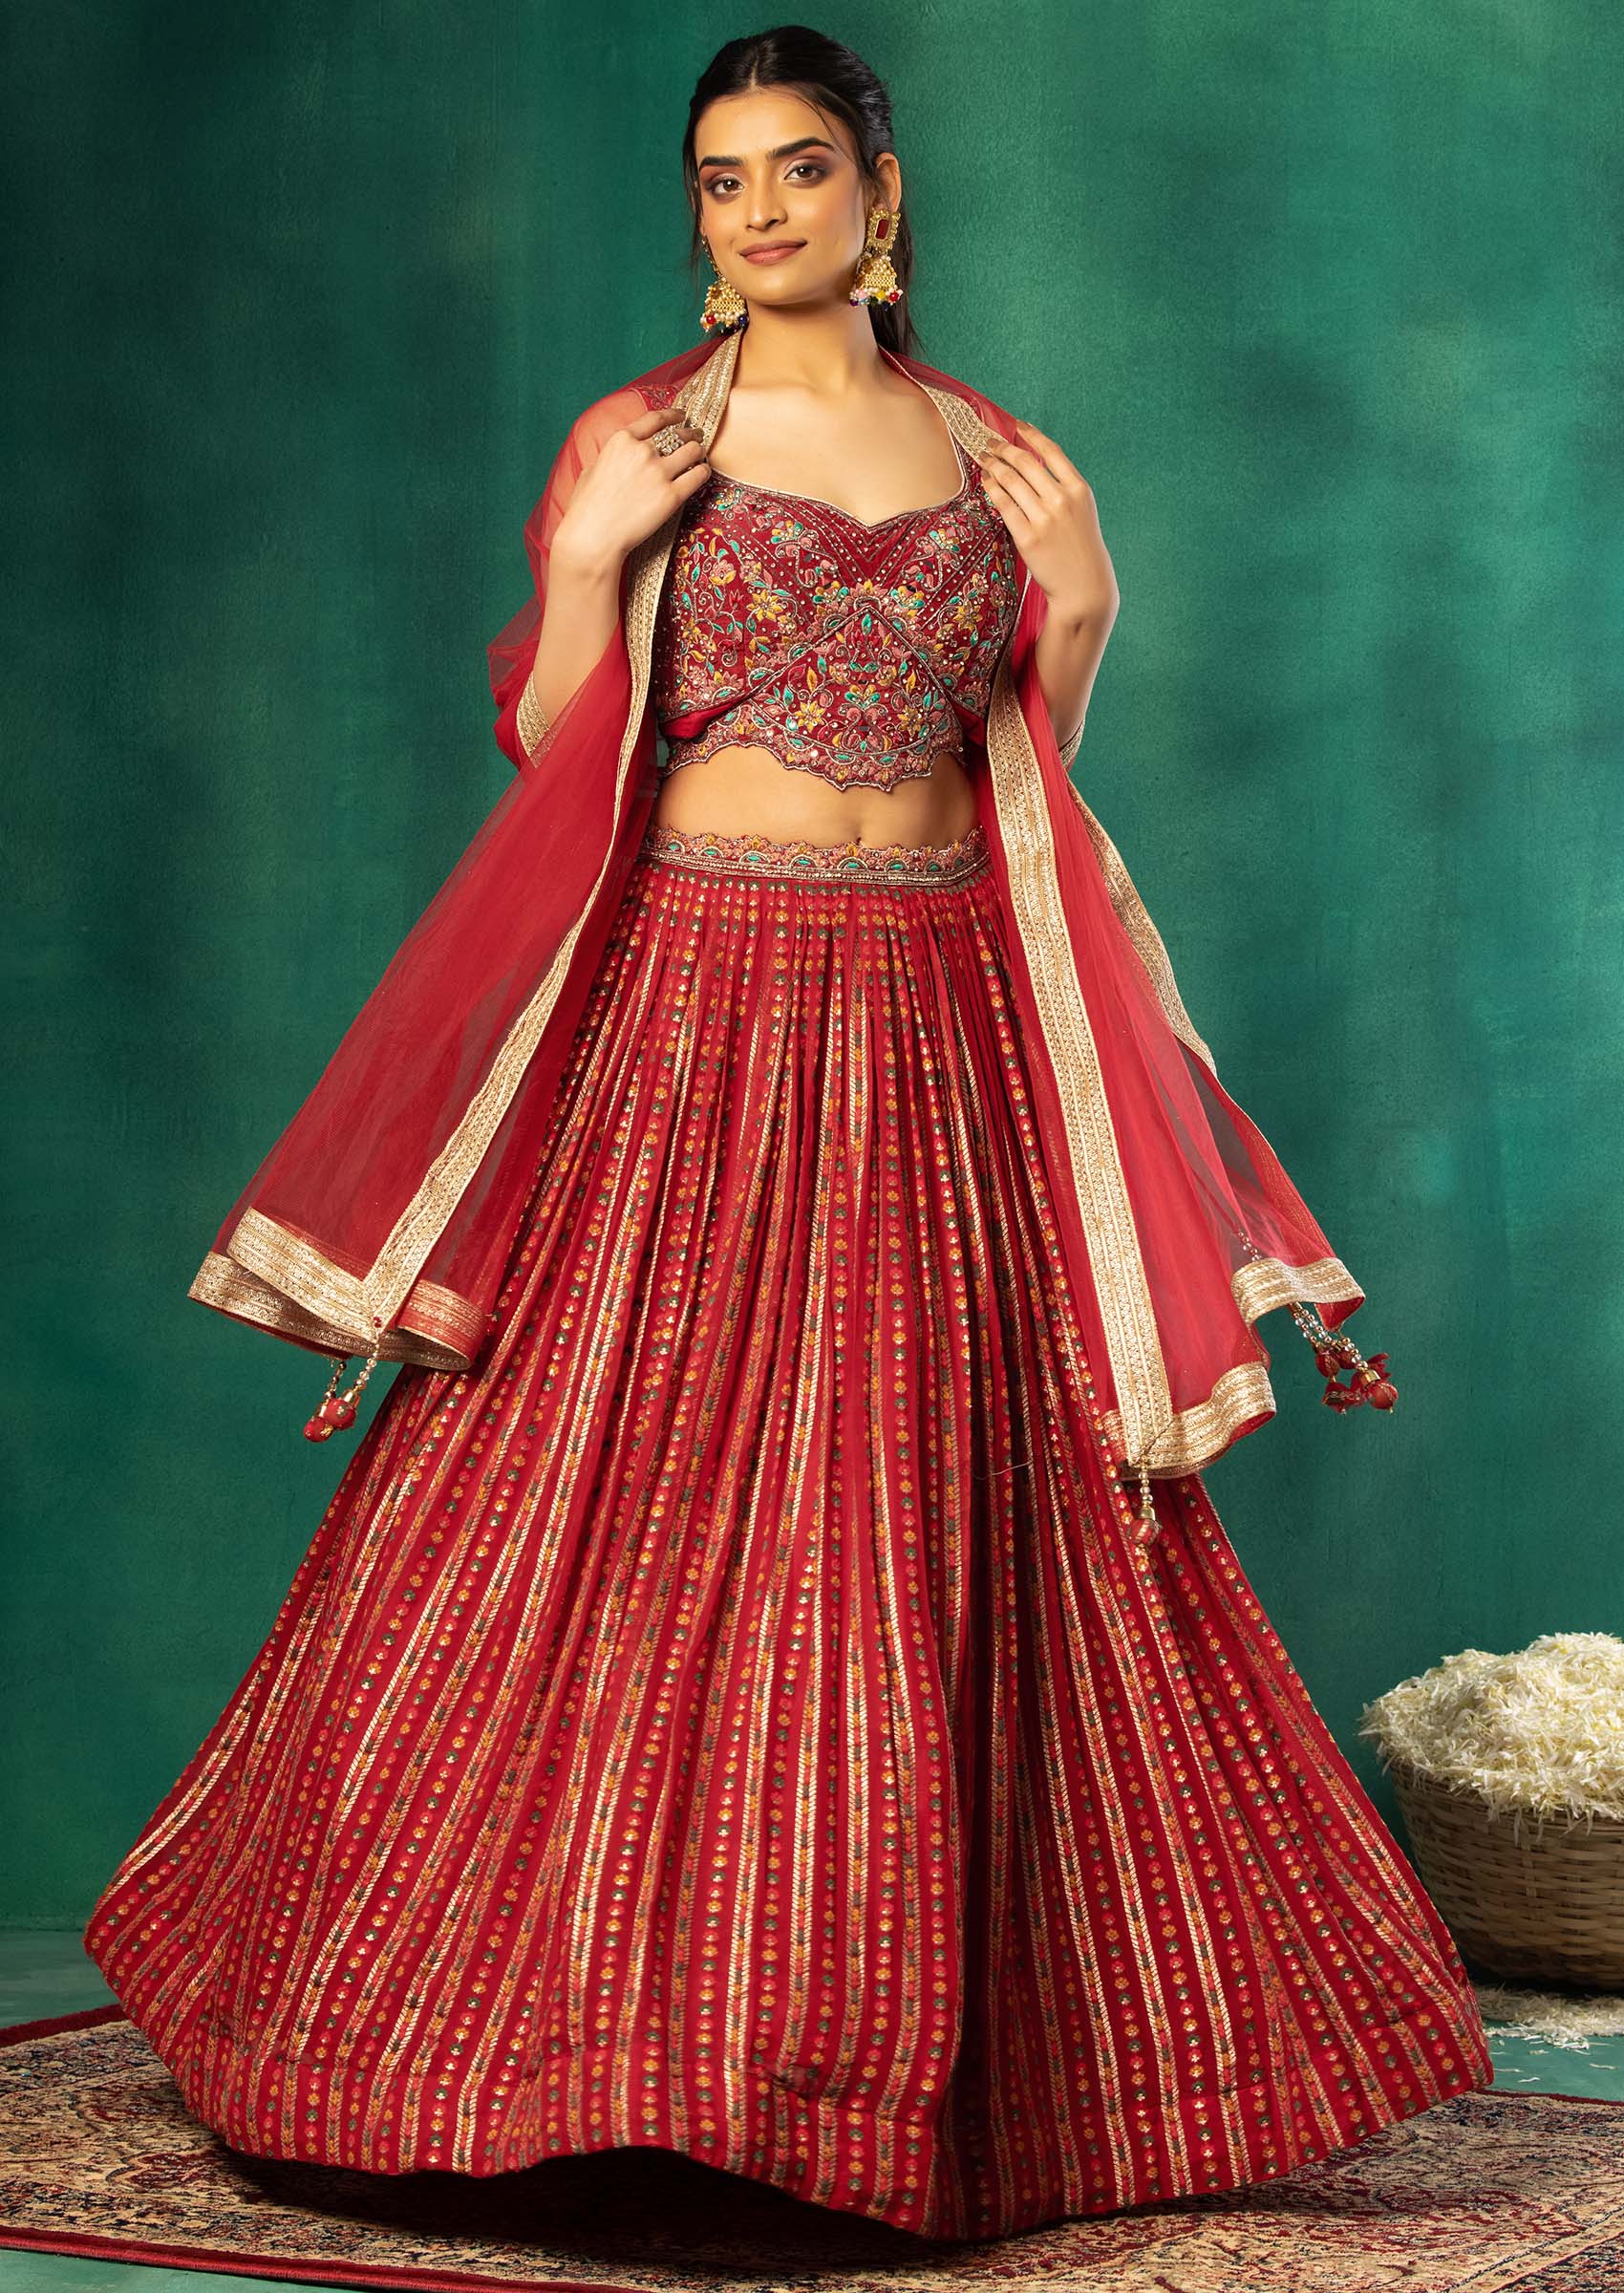 Golden Lehenga and Blouse with Maroon Dupatta | Lehenga, Golden lehenga,  Party wear dresses